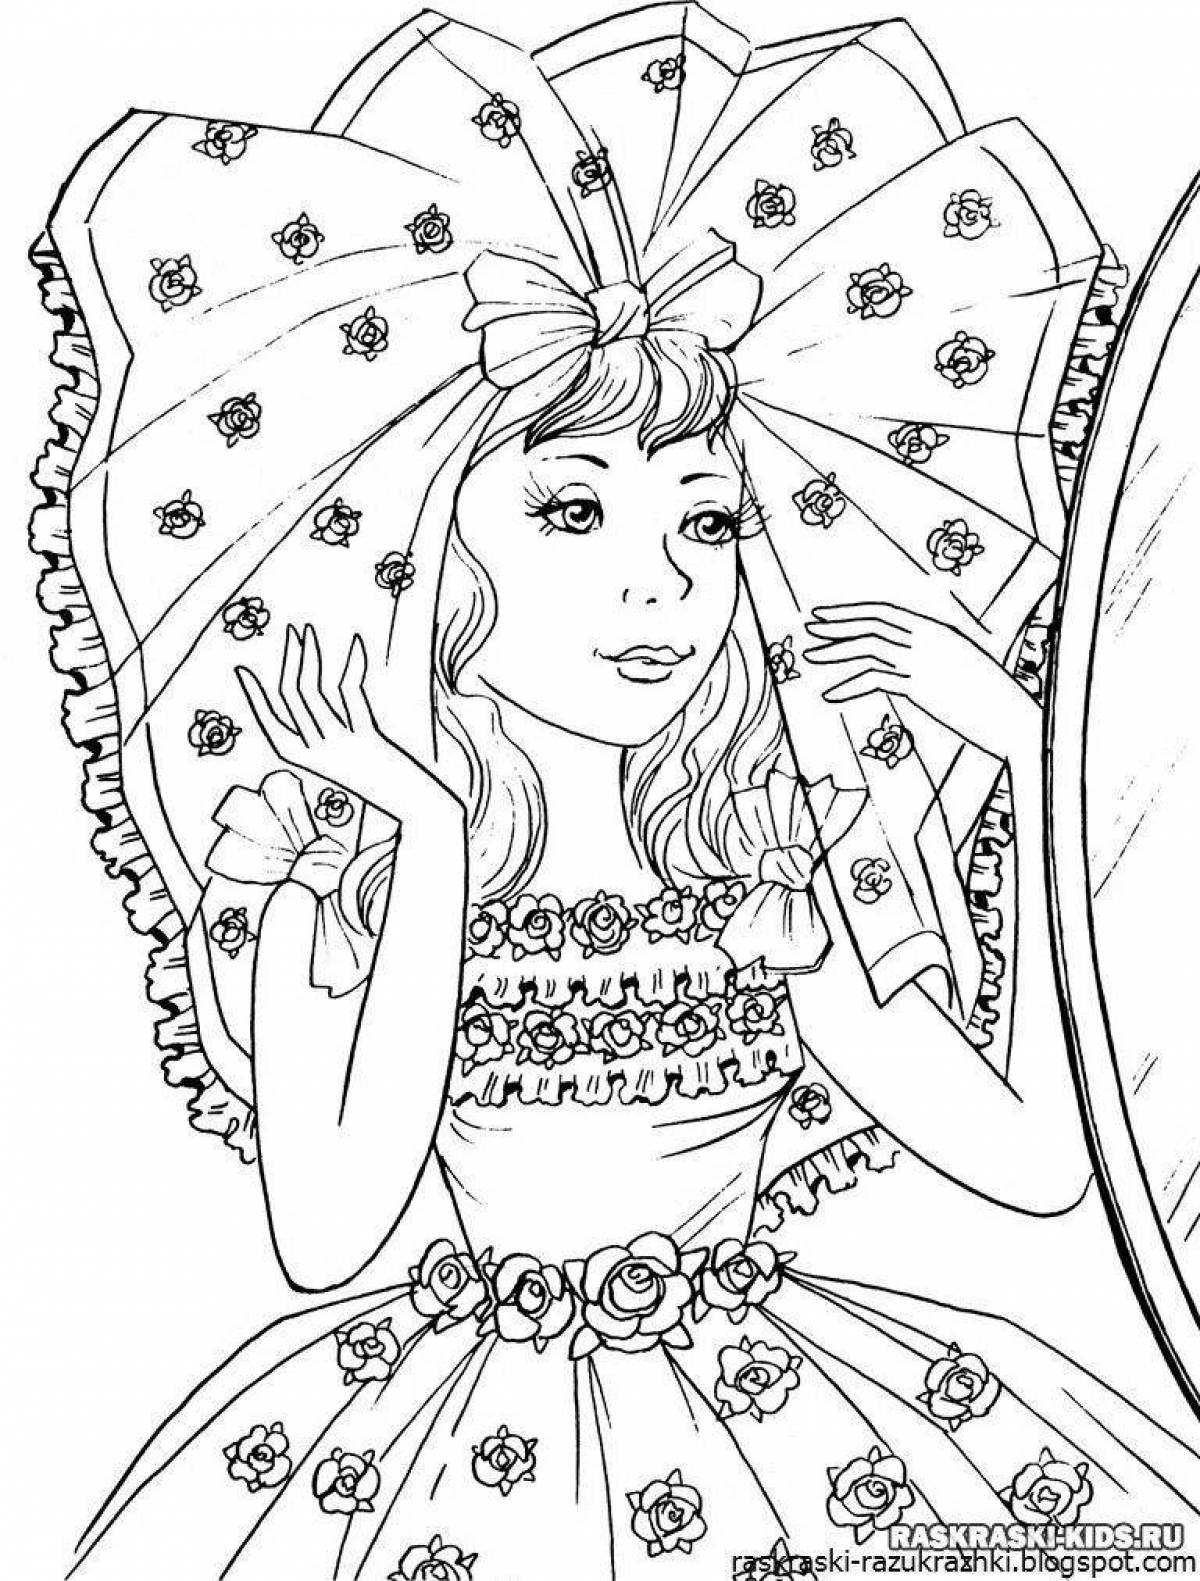 Fun coloring book for 10-12 year olds